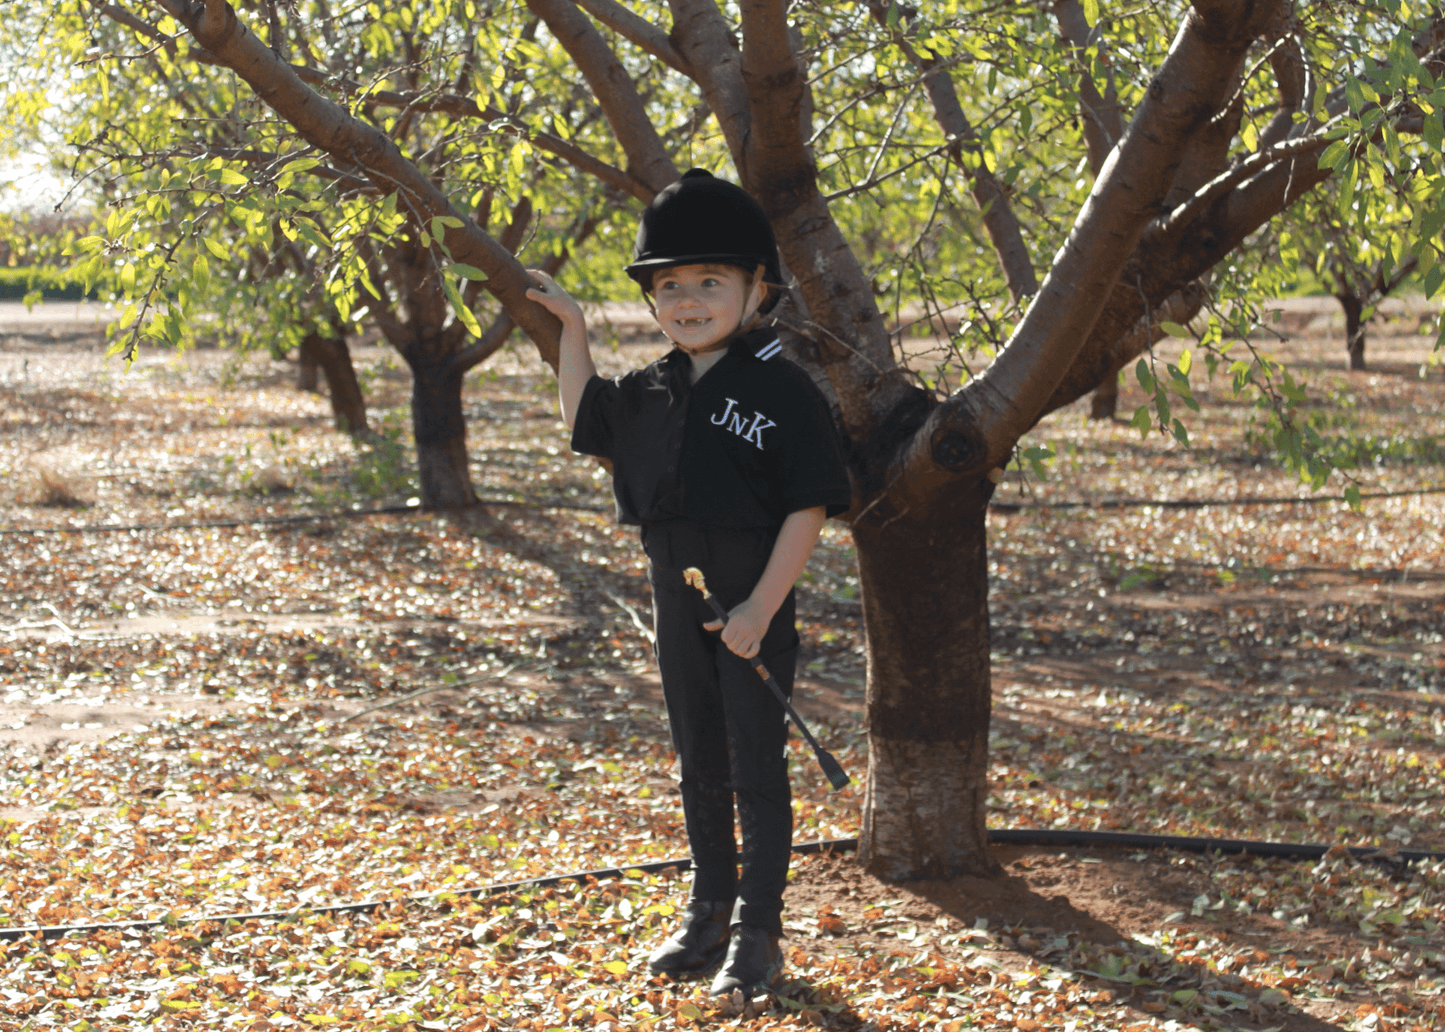 Child in horse riding tights and helmet stands by a tree.